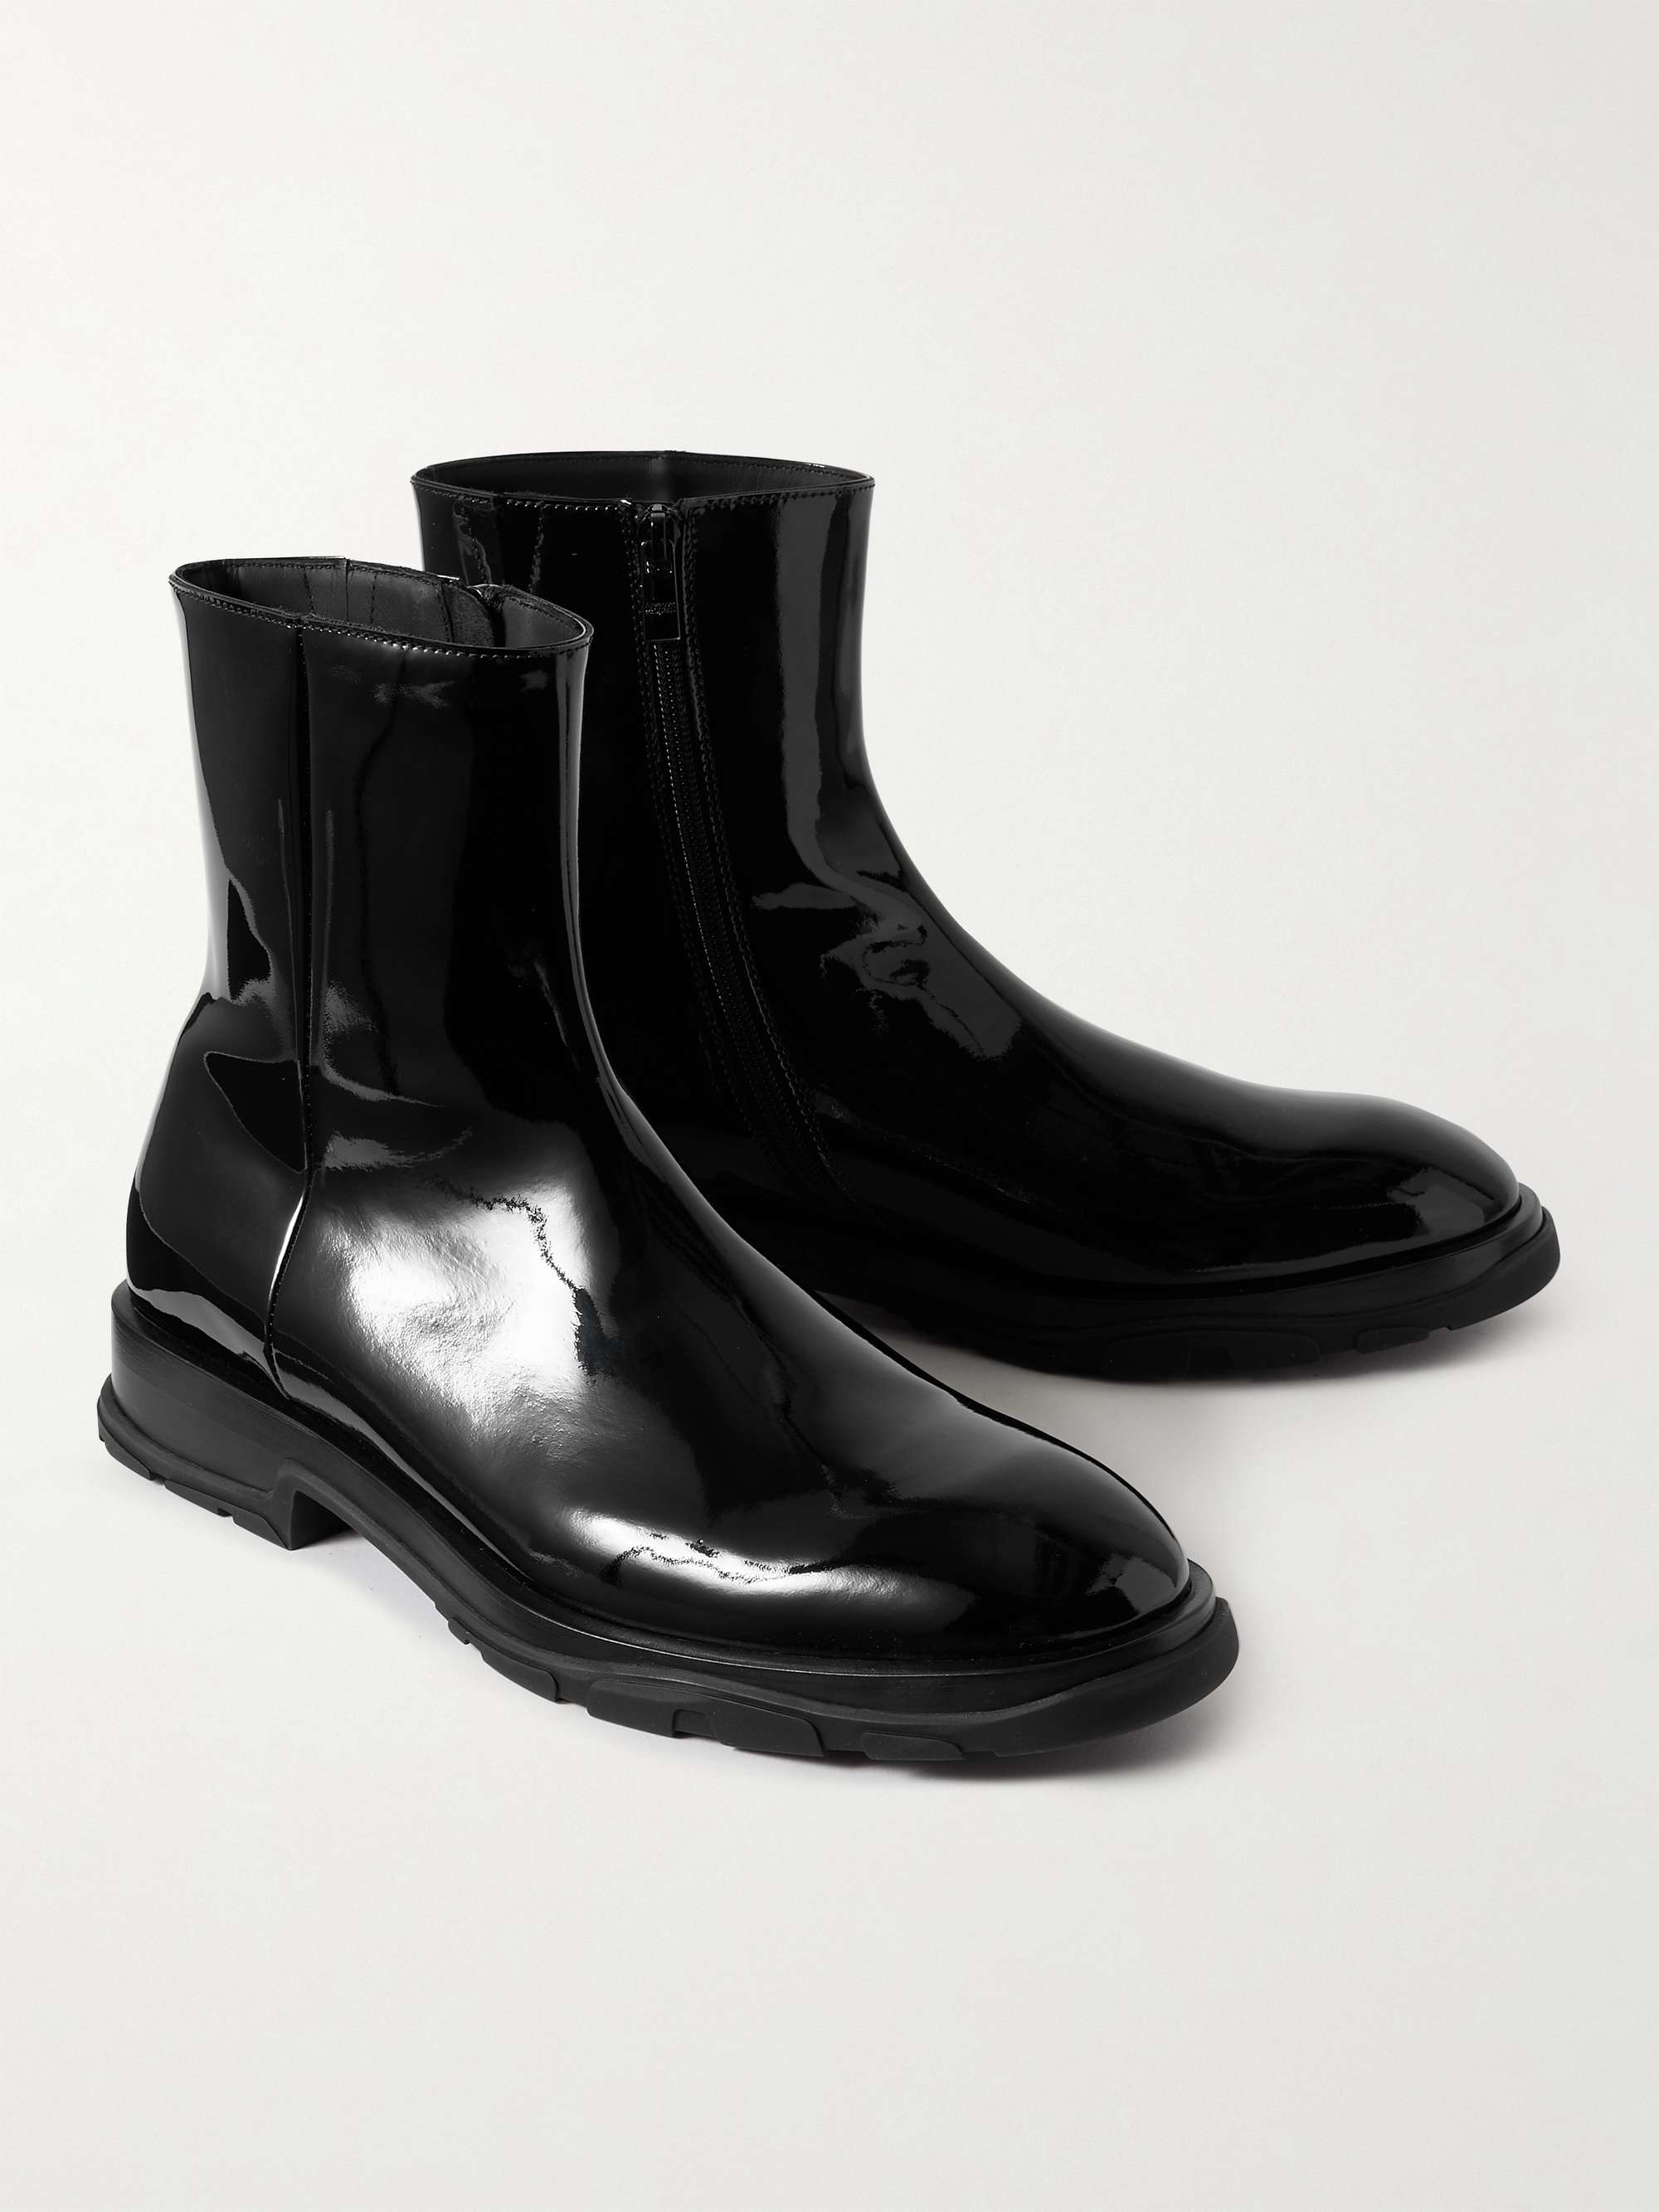 ALEXANDER MCQUEEN Patent-Leather Ankle Boots